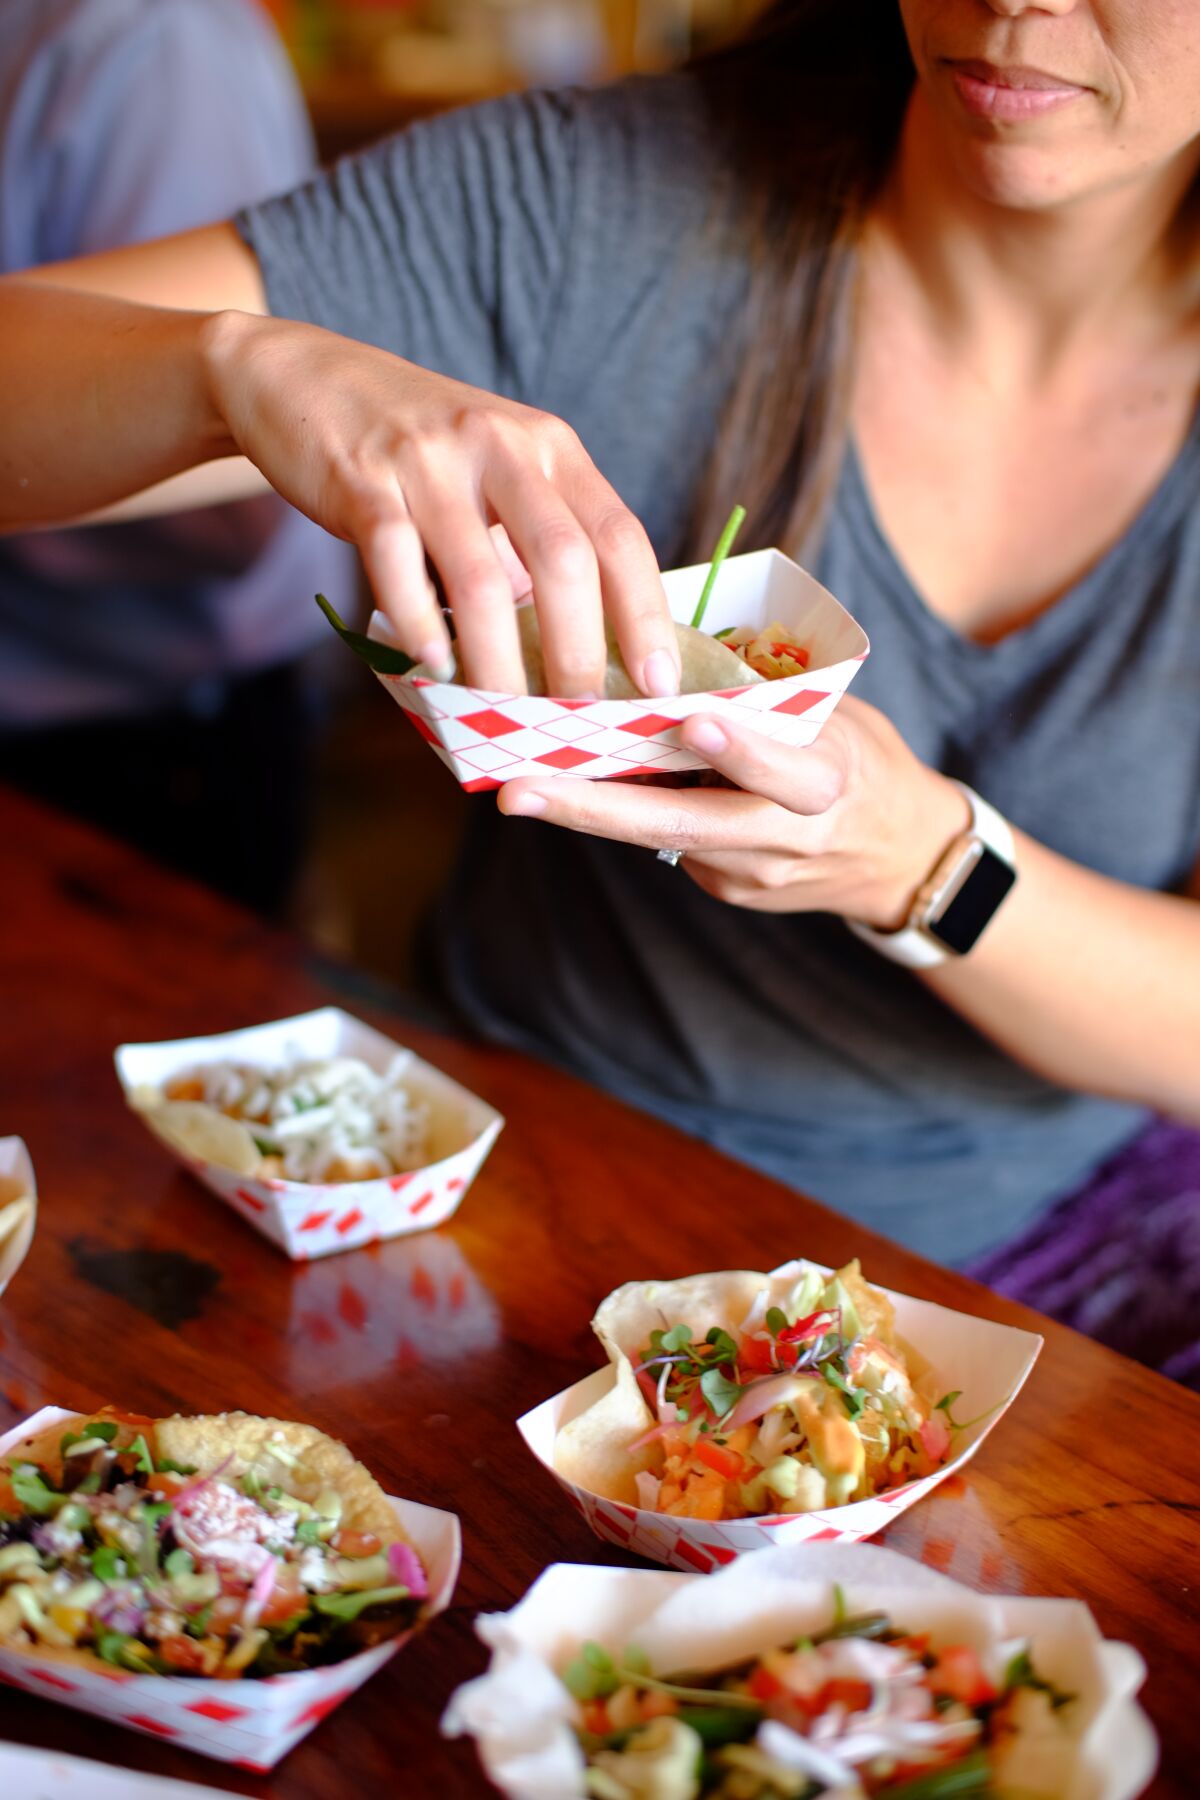 Moms will get a buy-one-get-one-free taco deal on Mother's Day at all City Tacos locations.